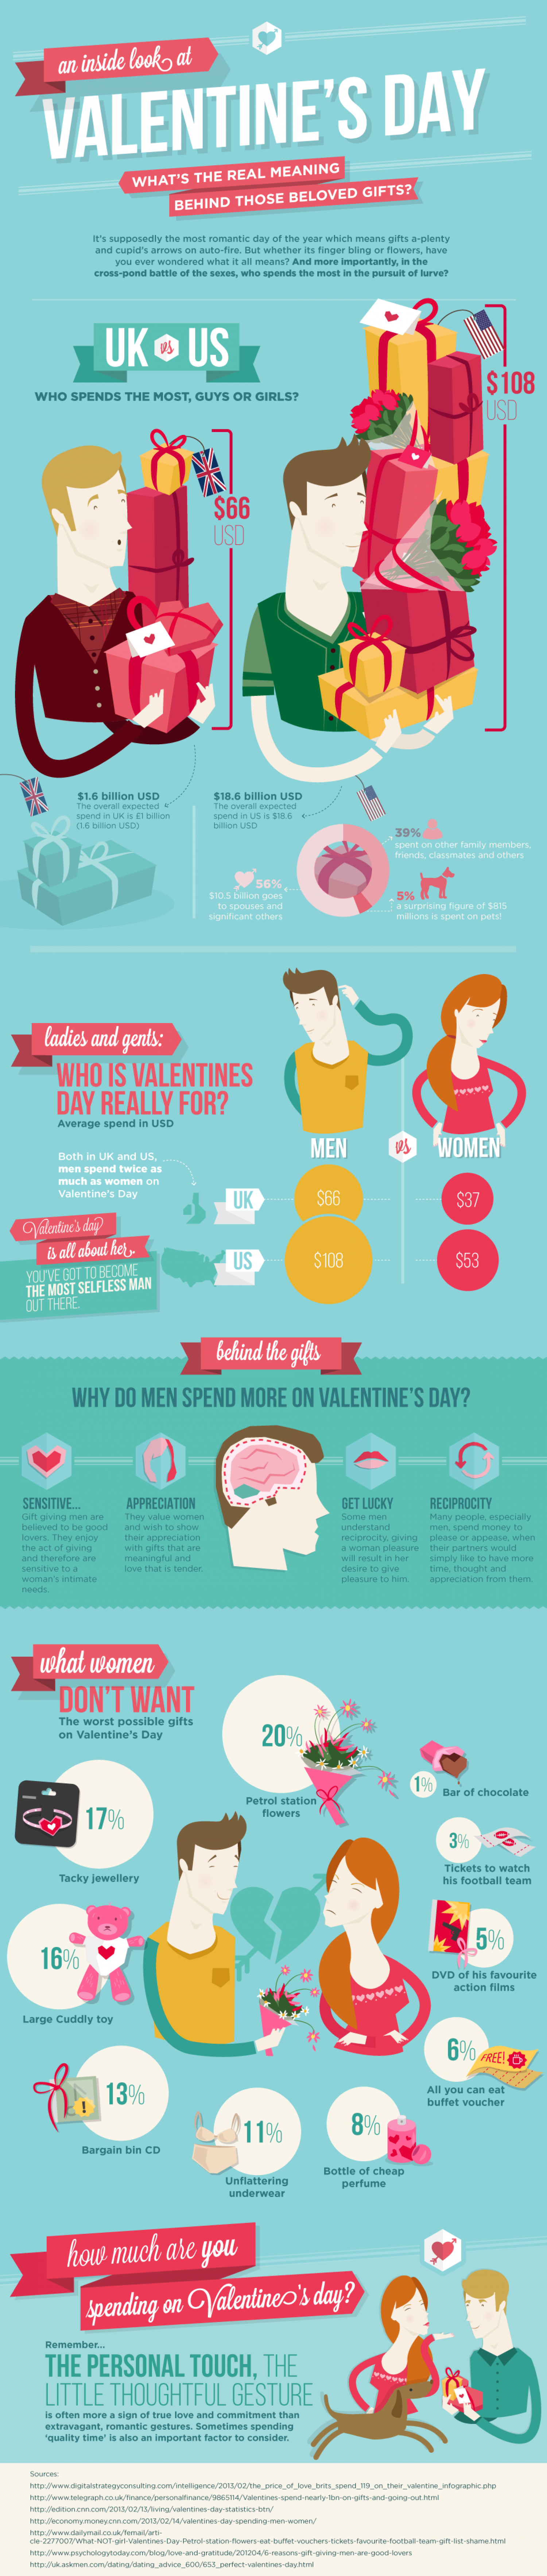 Valentine’s Day The Meaning of Gifts